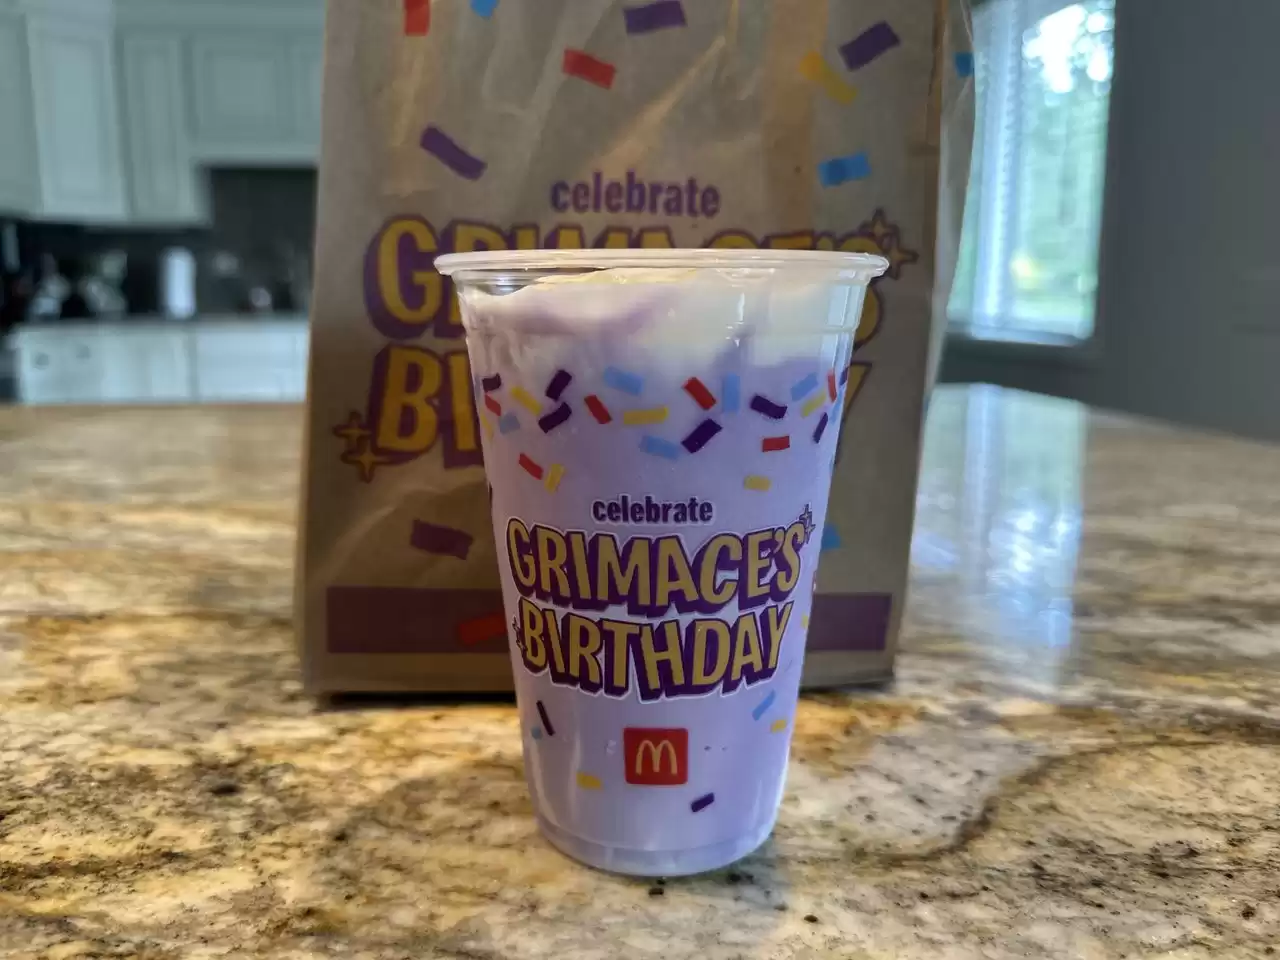 Viral TikTok Trend of Horror-Like Videos Sparked by McDonald's Grimace Shake Promotion